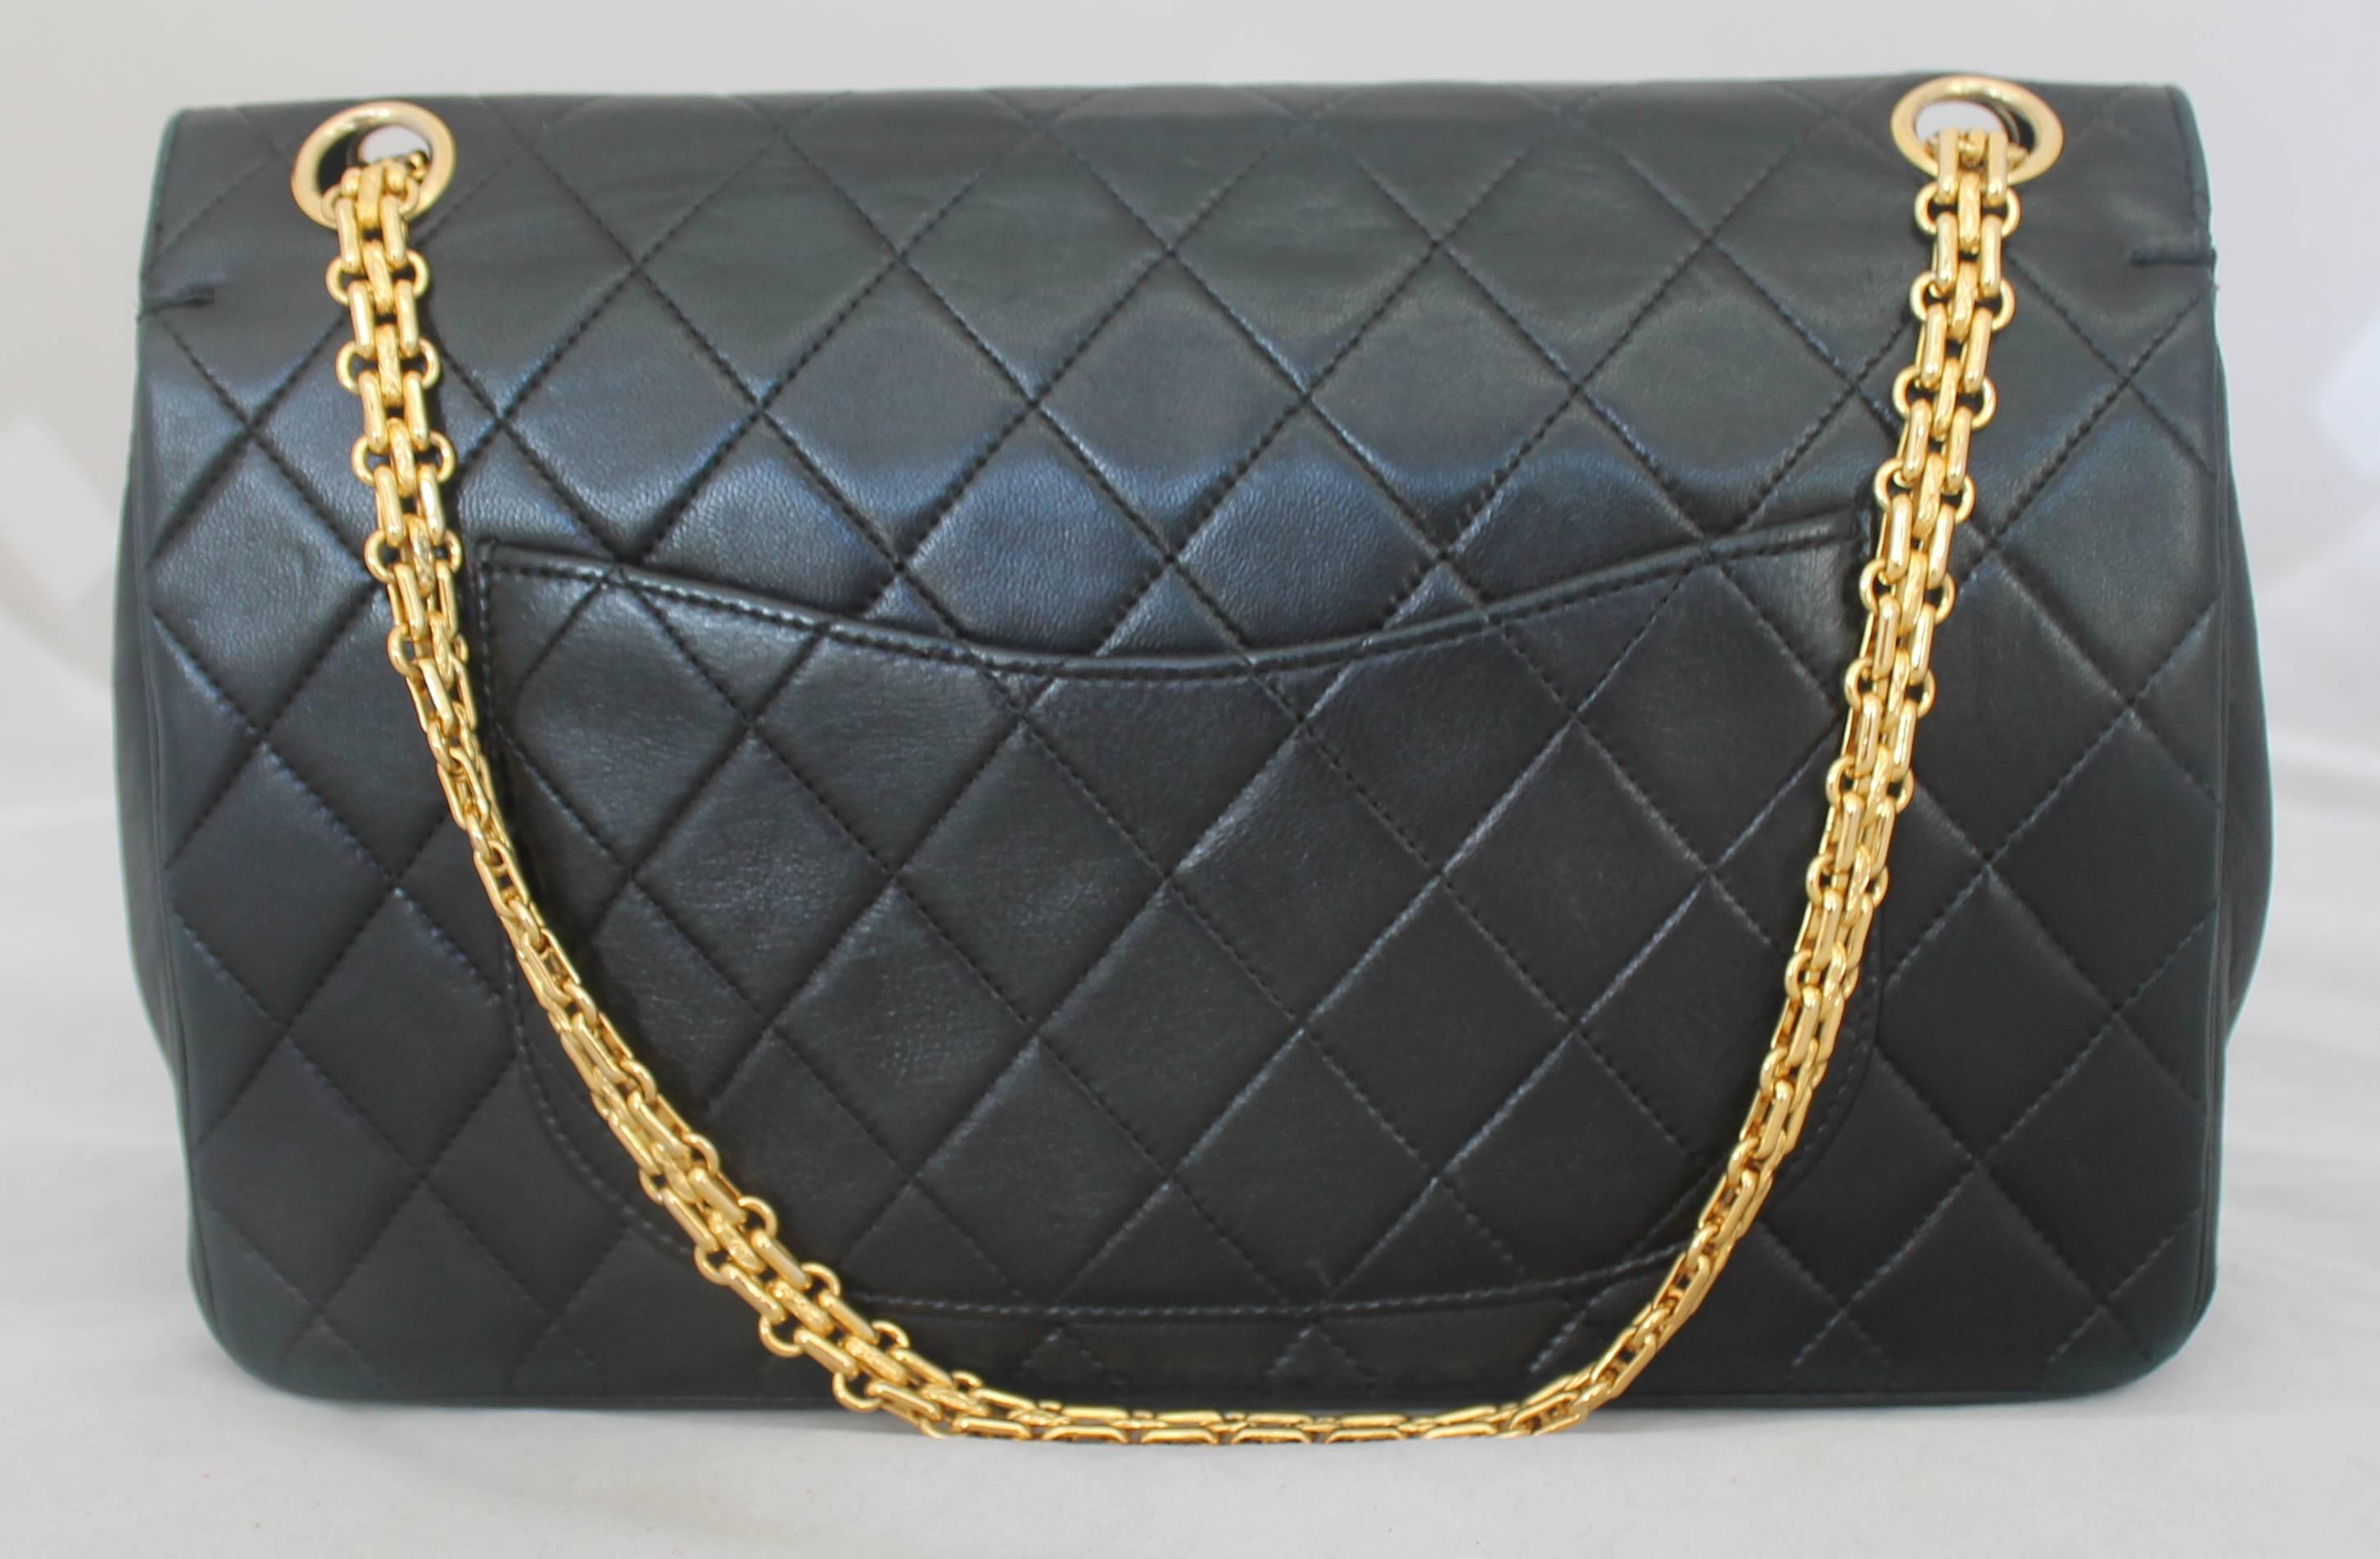 Chanel Black Quilted Lambskin Classic Double Flap Handbag - GHW - Circa Early 1980's.  This beautiful vintage Chanel bag is in very good vintage condition with only a minor scratch on the second flap.  It features the classic black quilted lambskin,